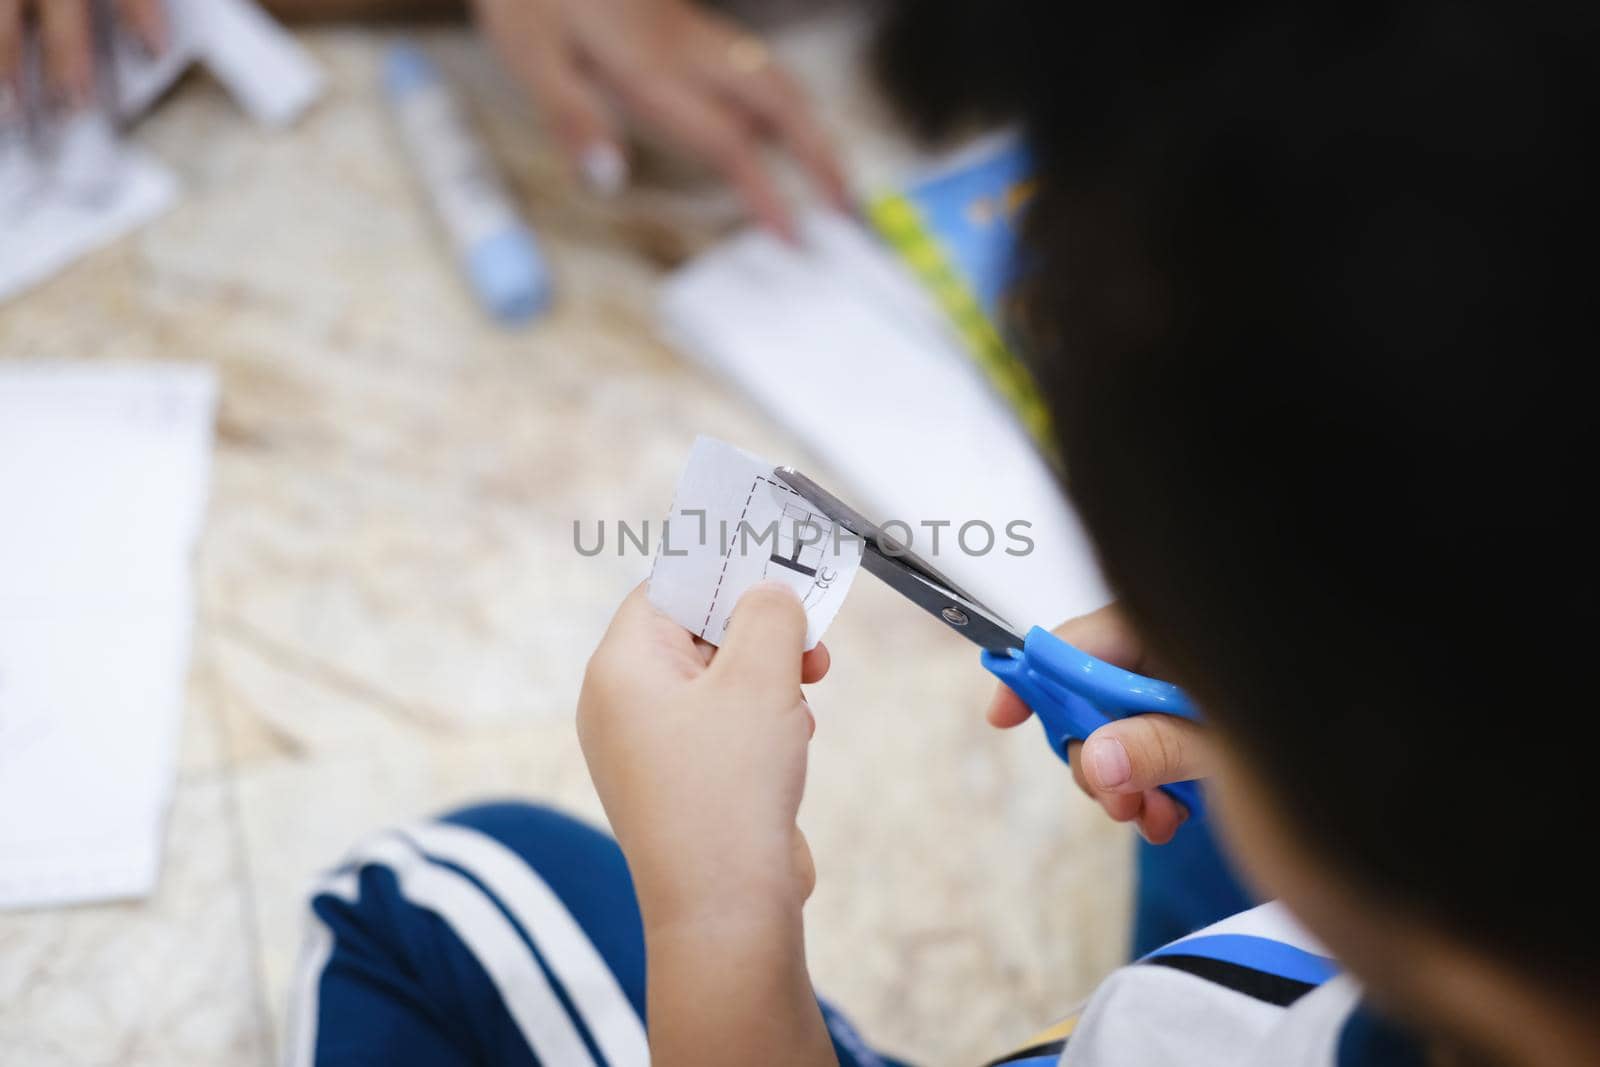 Childhood are learning to use scissors to cut paper